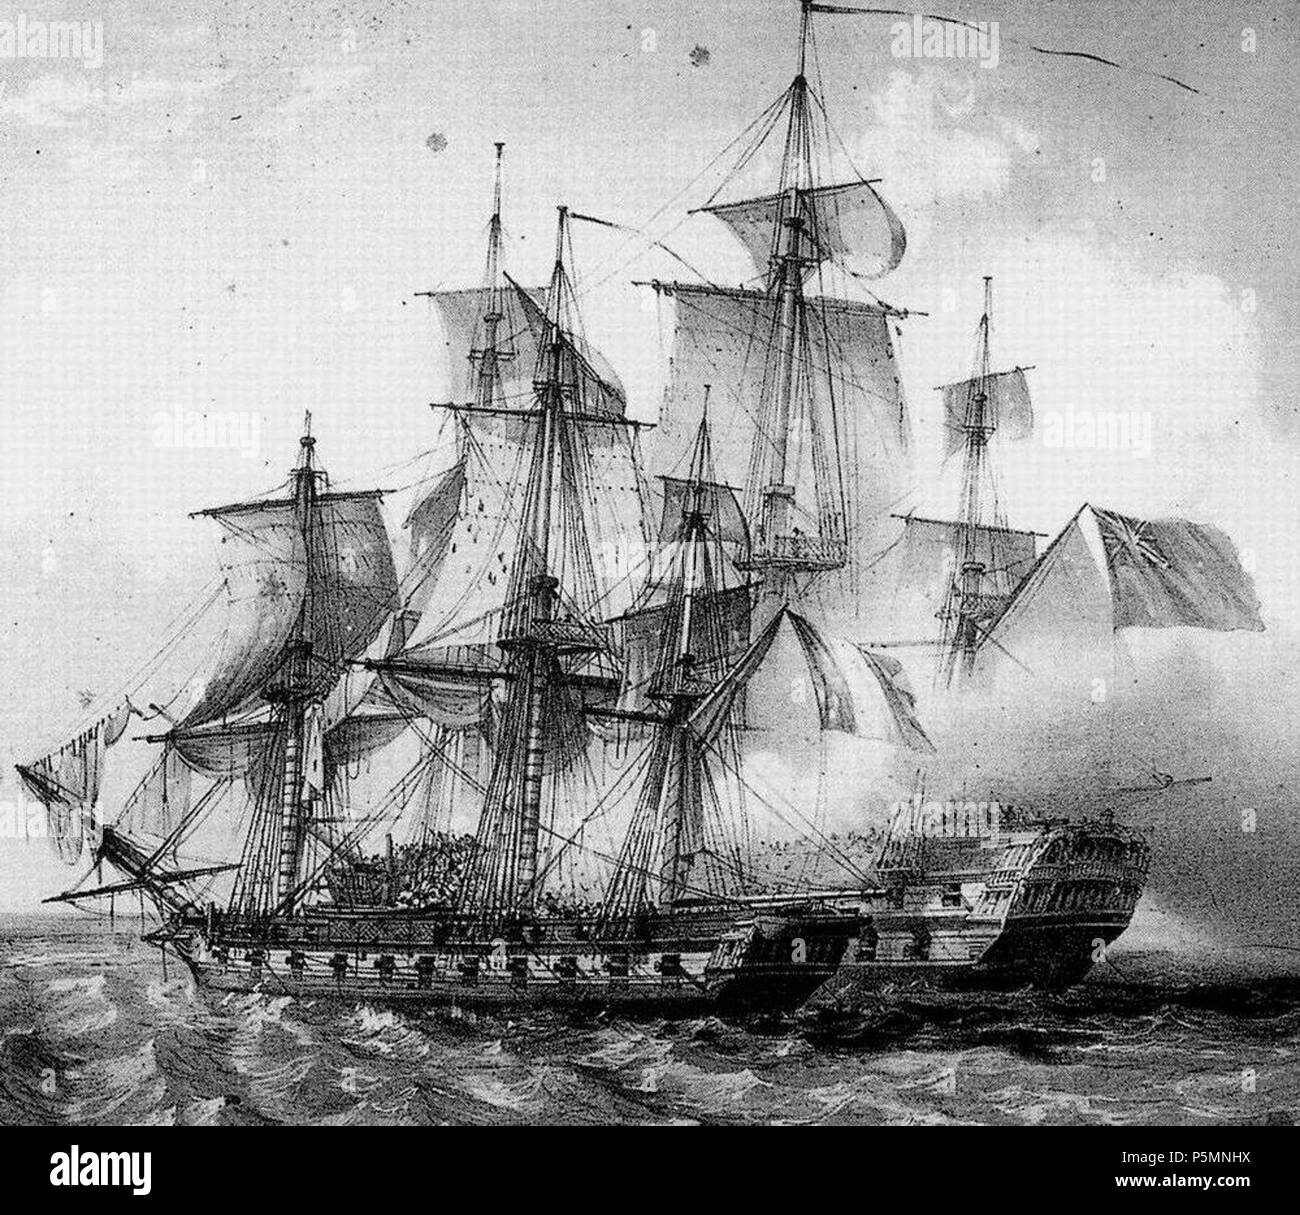 N/A. English: Capture of the East Indiaman Lord Nelson by the French privateer Bellone, under Jacques François Perroud, on 14 August 1803 .   Auguste Étienne François Mayer  (1805–1890)    Alternative names Auguste Etienne François Mayer; Auguste Etienne Mayer; Auguste Mayer; Auguste Etienne Francois Mayer  Description French painter  Date of birth/death 3 July 1805 22 September 1890  Location of birth/death Brest Brest  Authority control  : Q2871318 VIAF:51960536 ISNI:0000 0000 6662 7106 ULAN:500030137 LCCN:nb2007002353 GND:135700809 WorldCat 150 Auguste Mayer-Bellone vs Lord Nelson Stock Photo